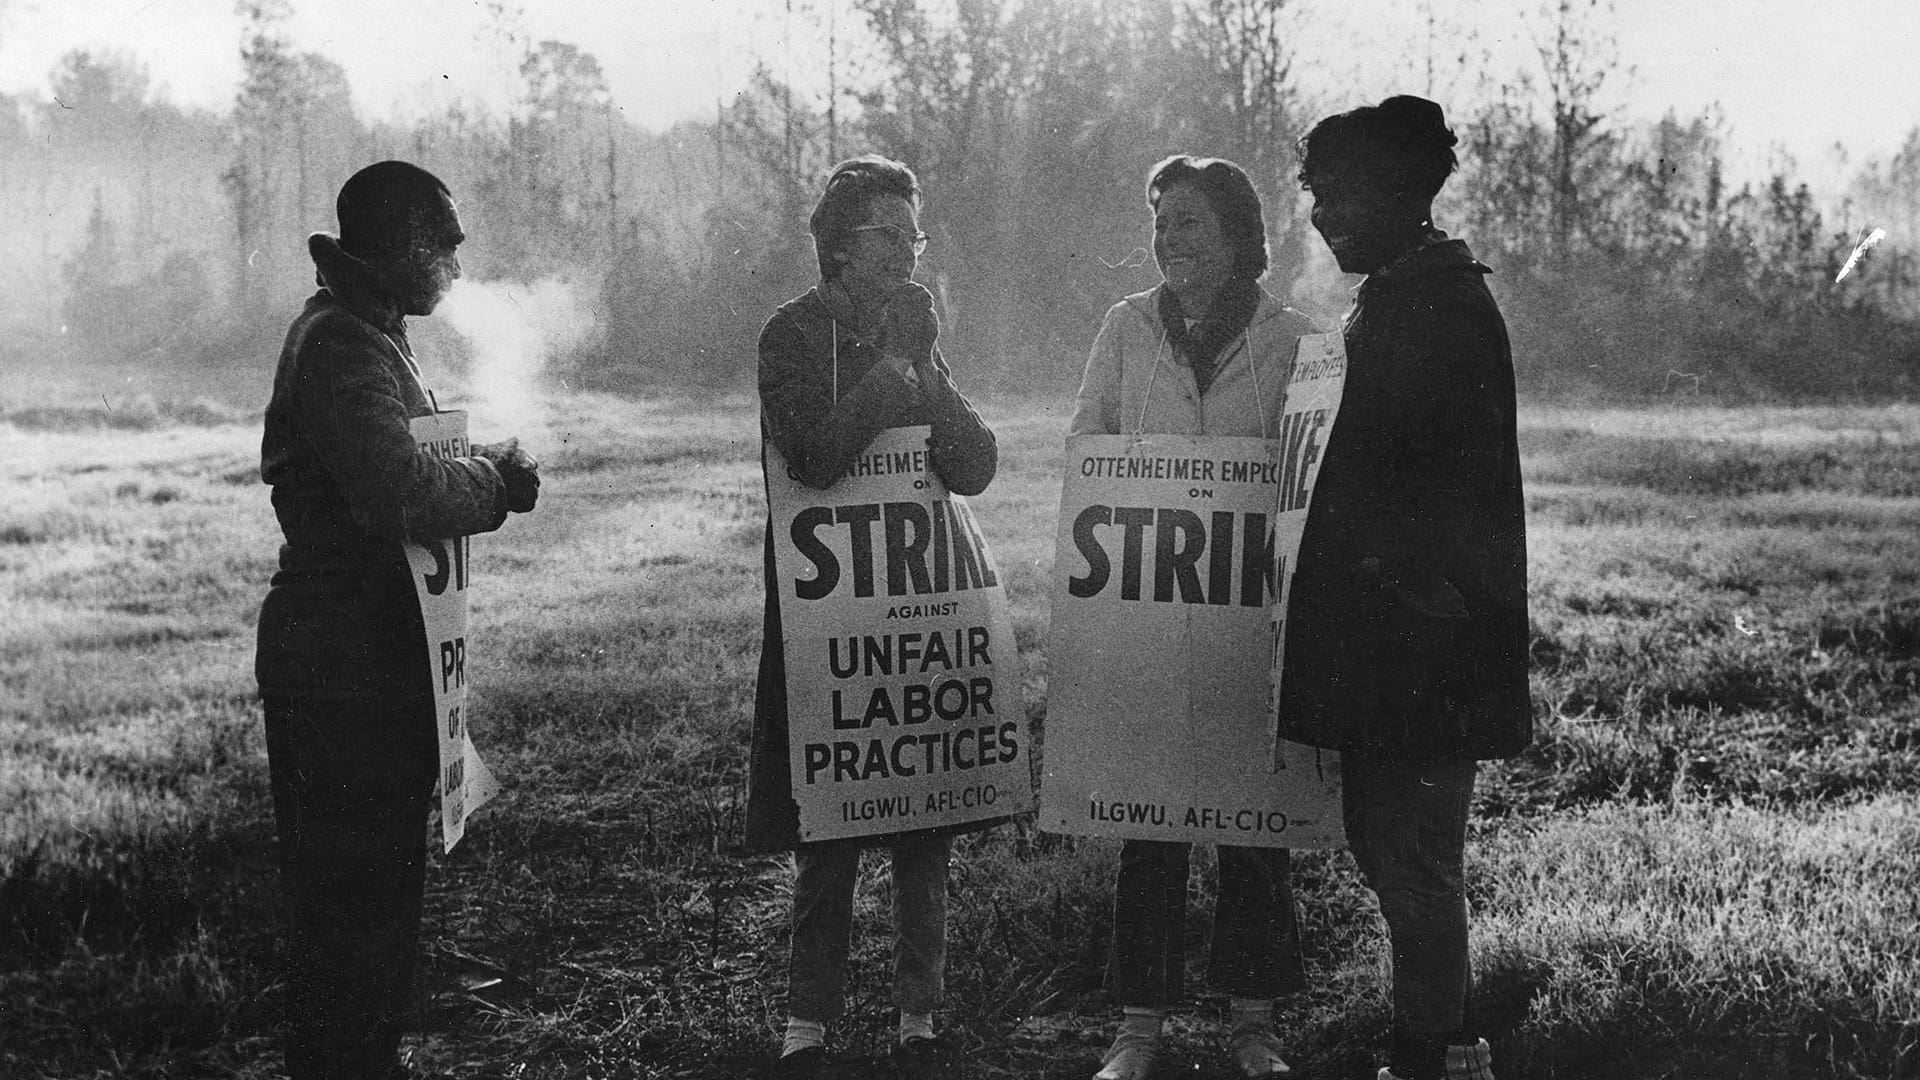 Three female and one male International Ladies Garment Workers Union members stand in the cold holding strike placards protesting unfair labor practices by the Ottenheimer company.